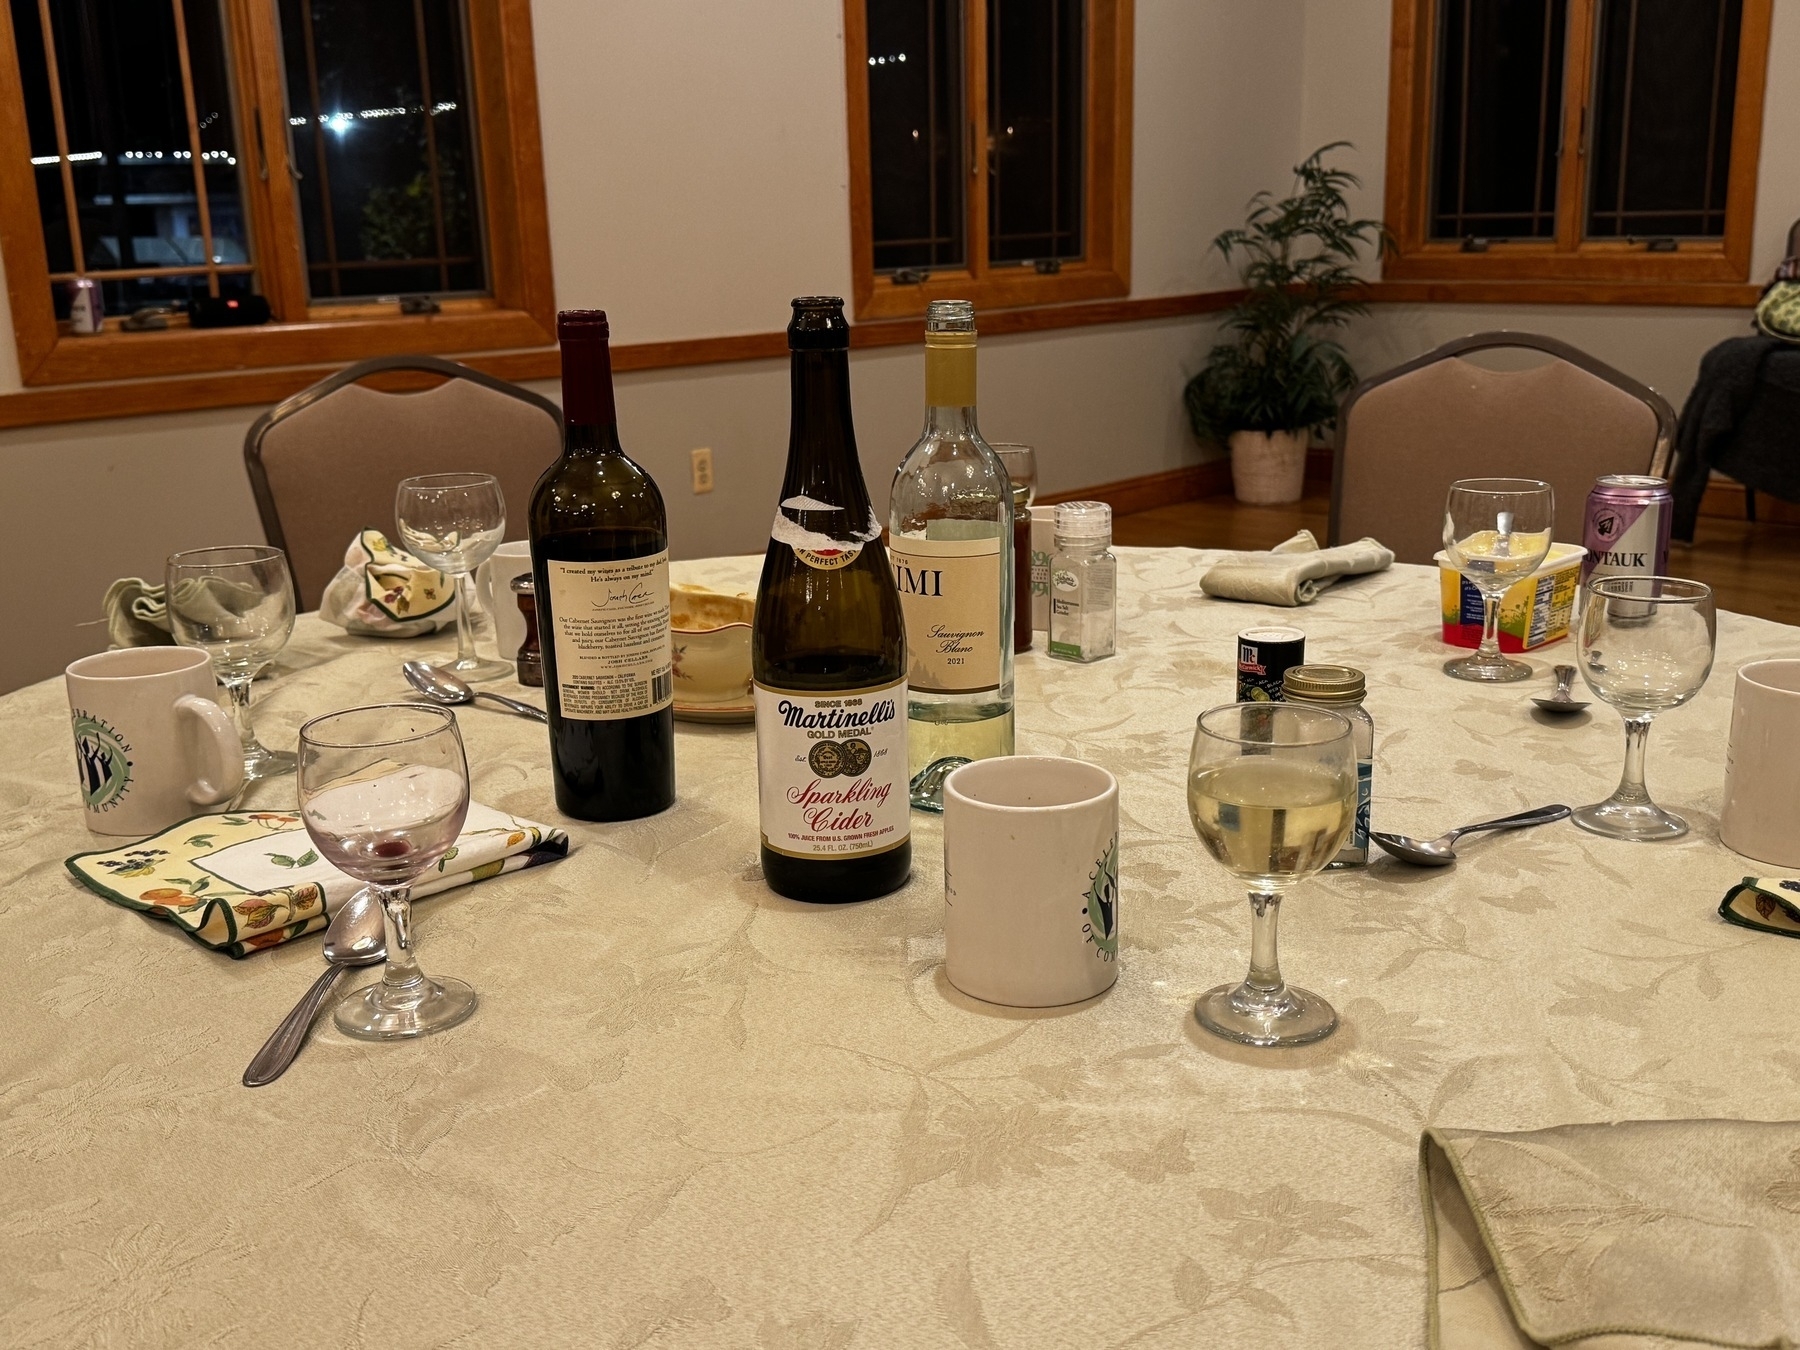 a set table at nighttime. there are three tall glass bottles. there are glasses and mugs. a white tablecloth. no one is sat down yet.